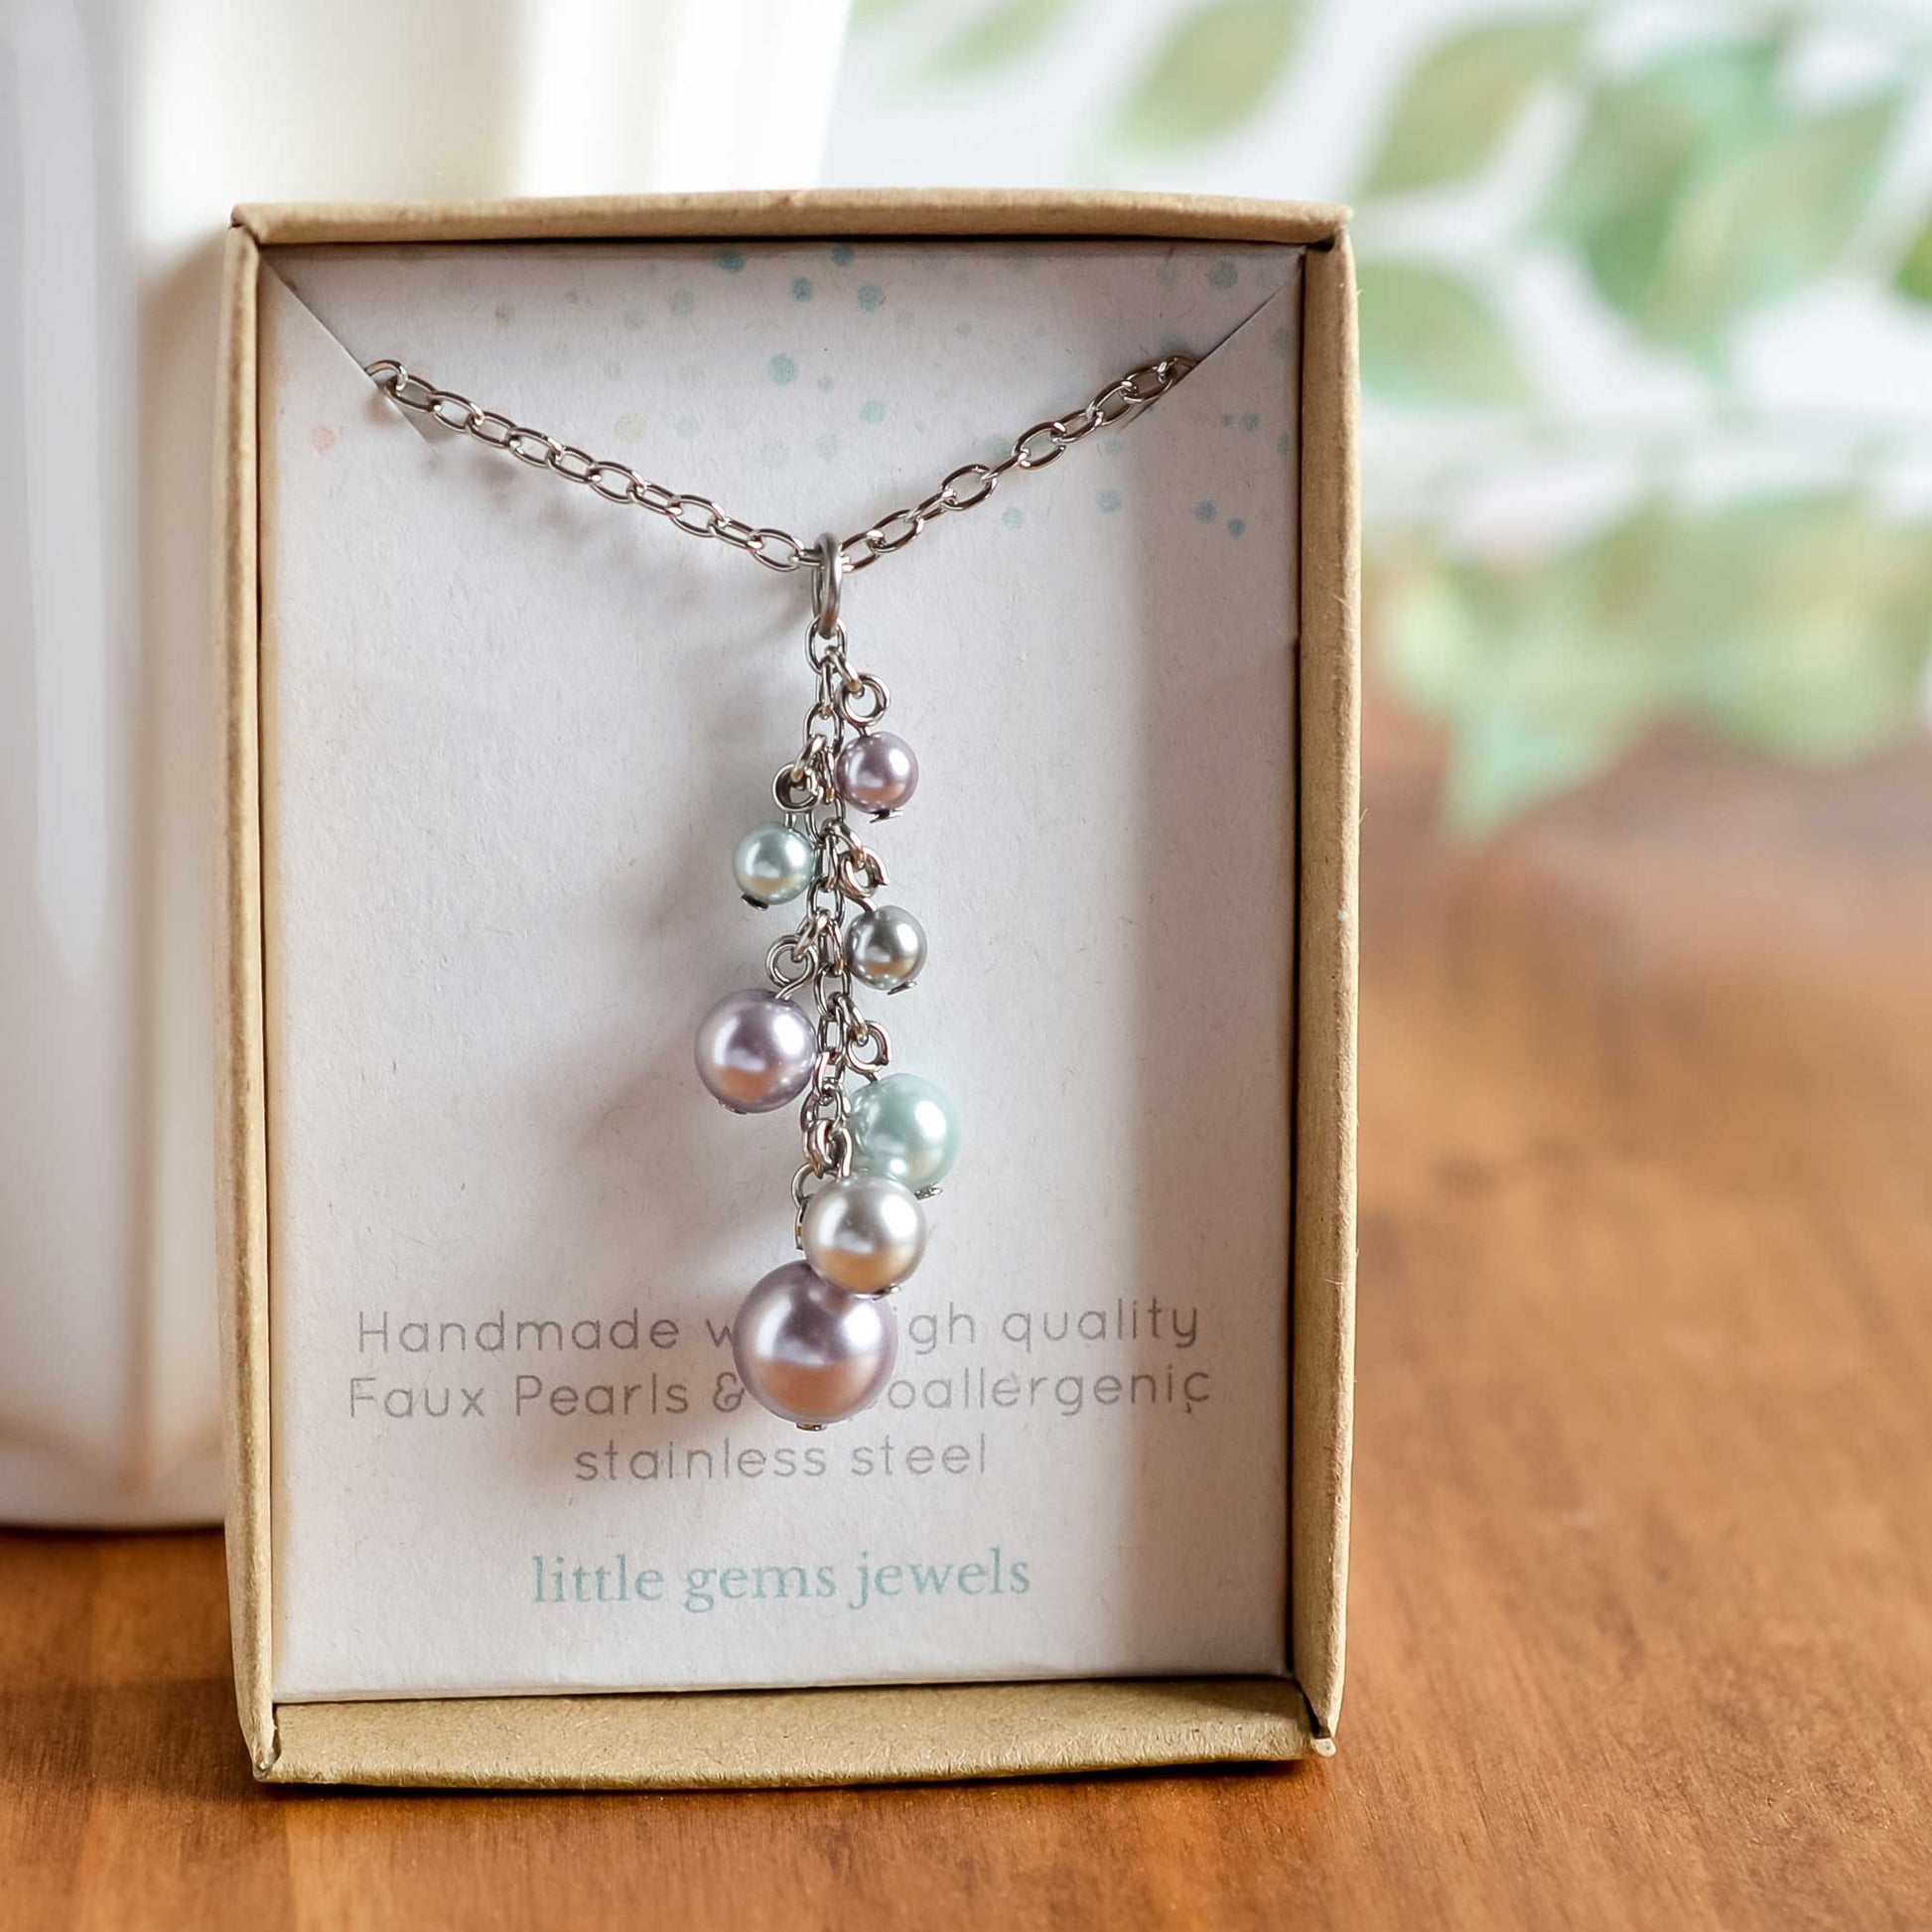 Faux pearl cluster pendant necklace in eco friendly gift box